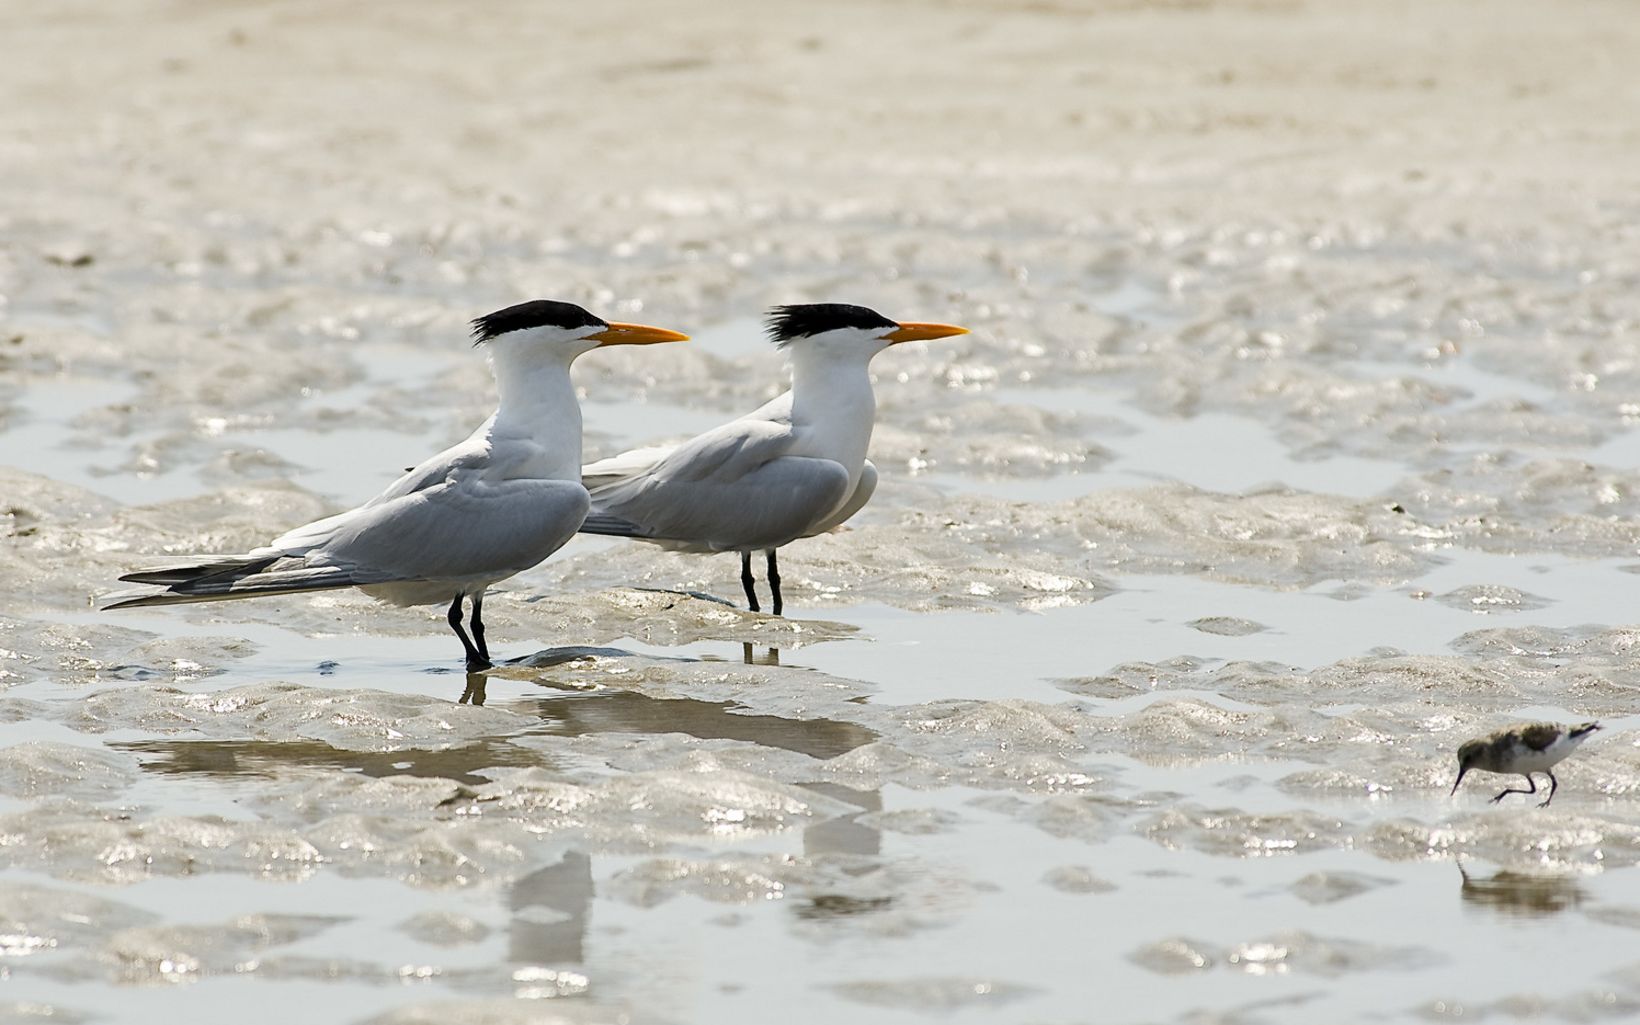 Two black, white and gray royal terns standing on the beach.